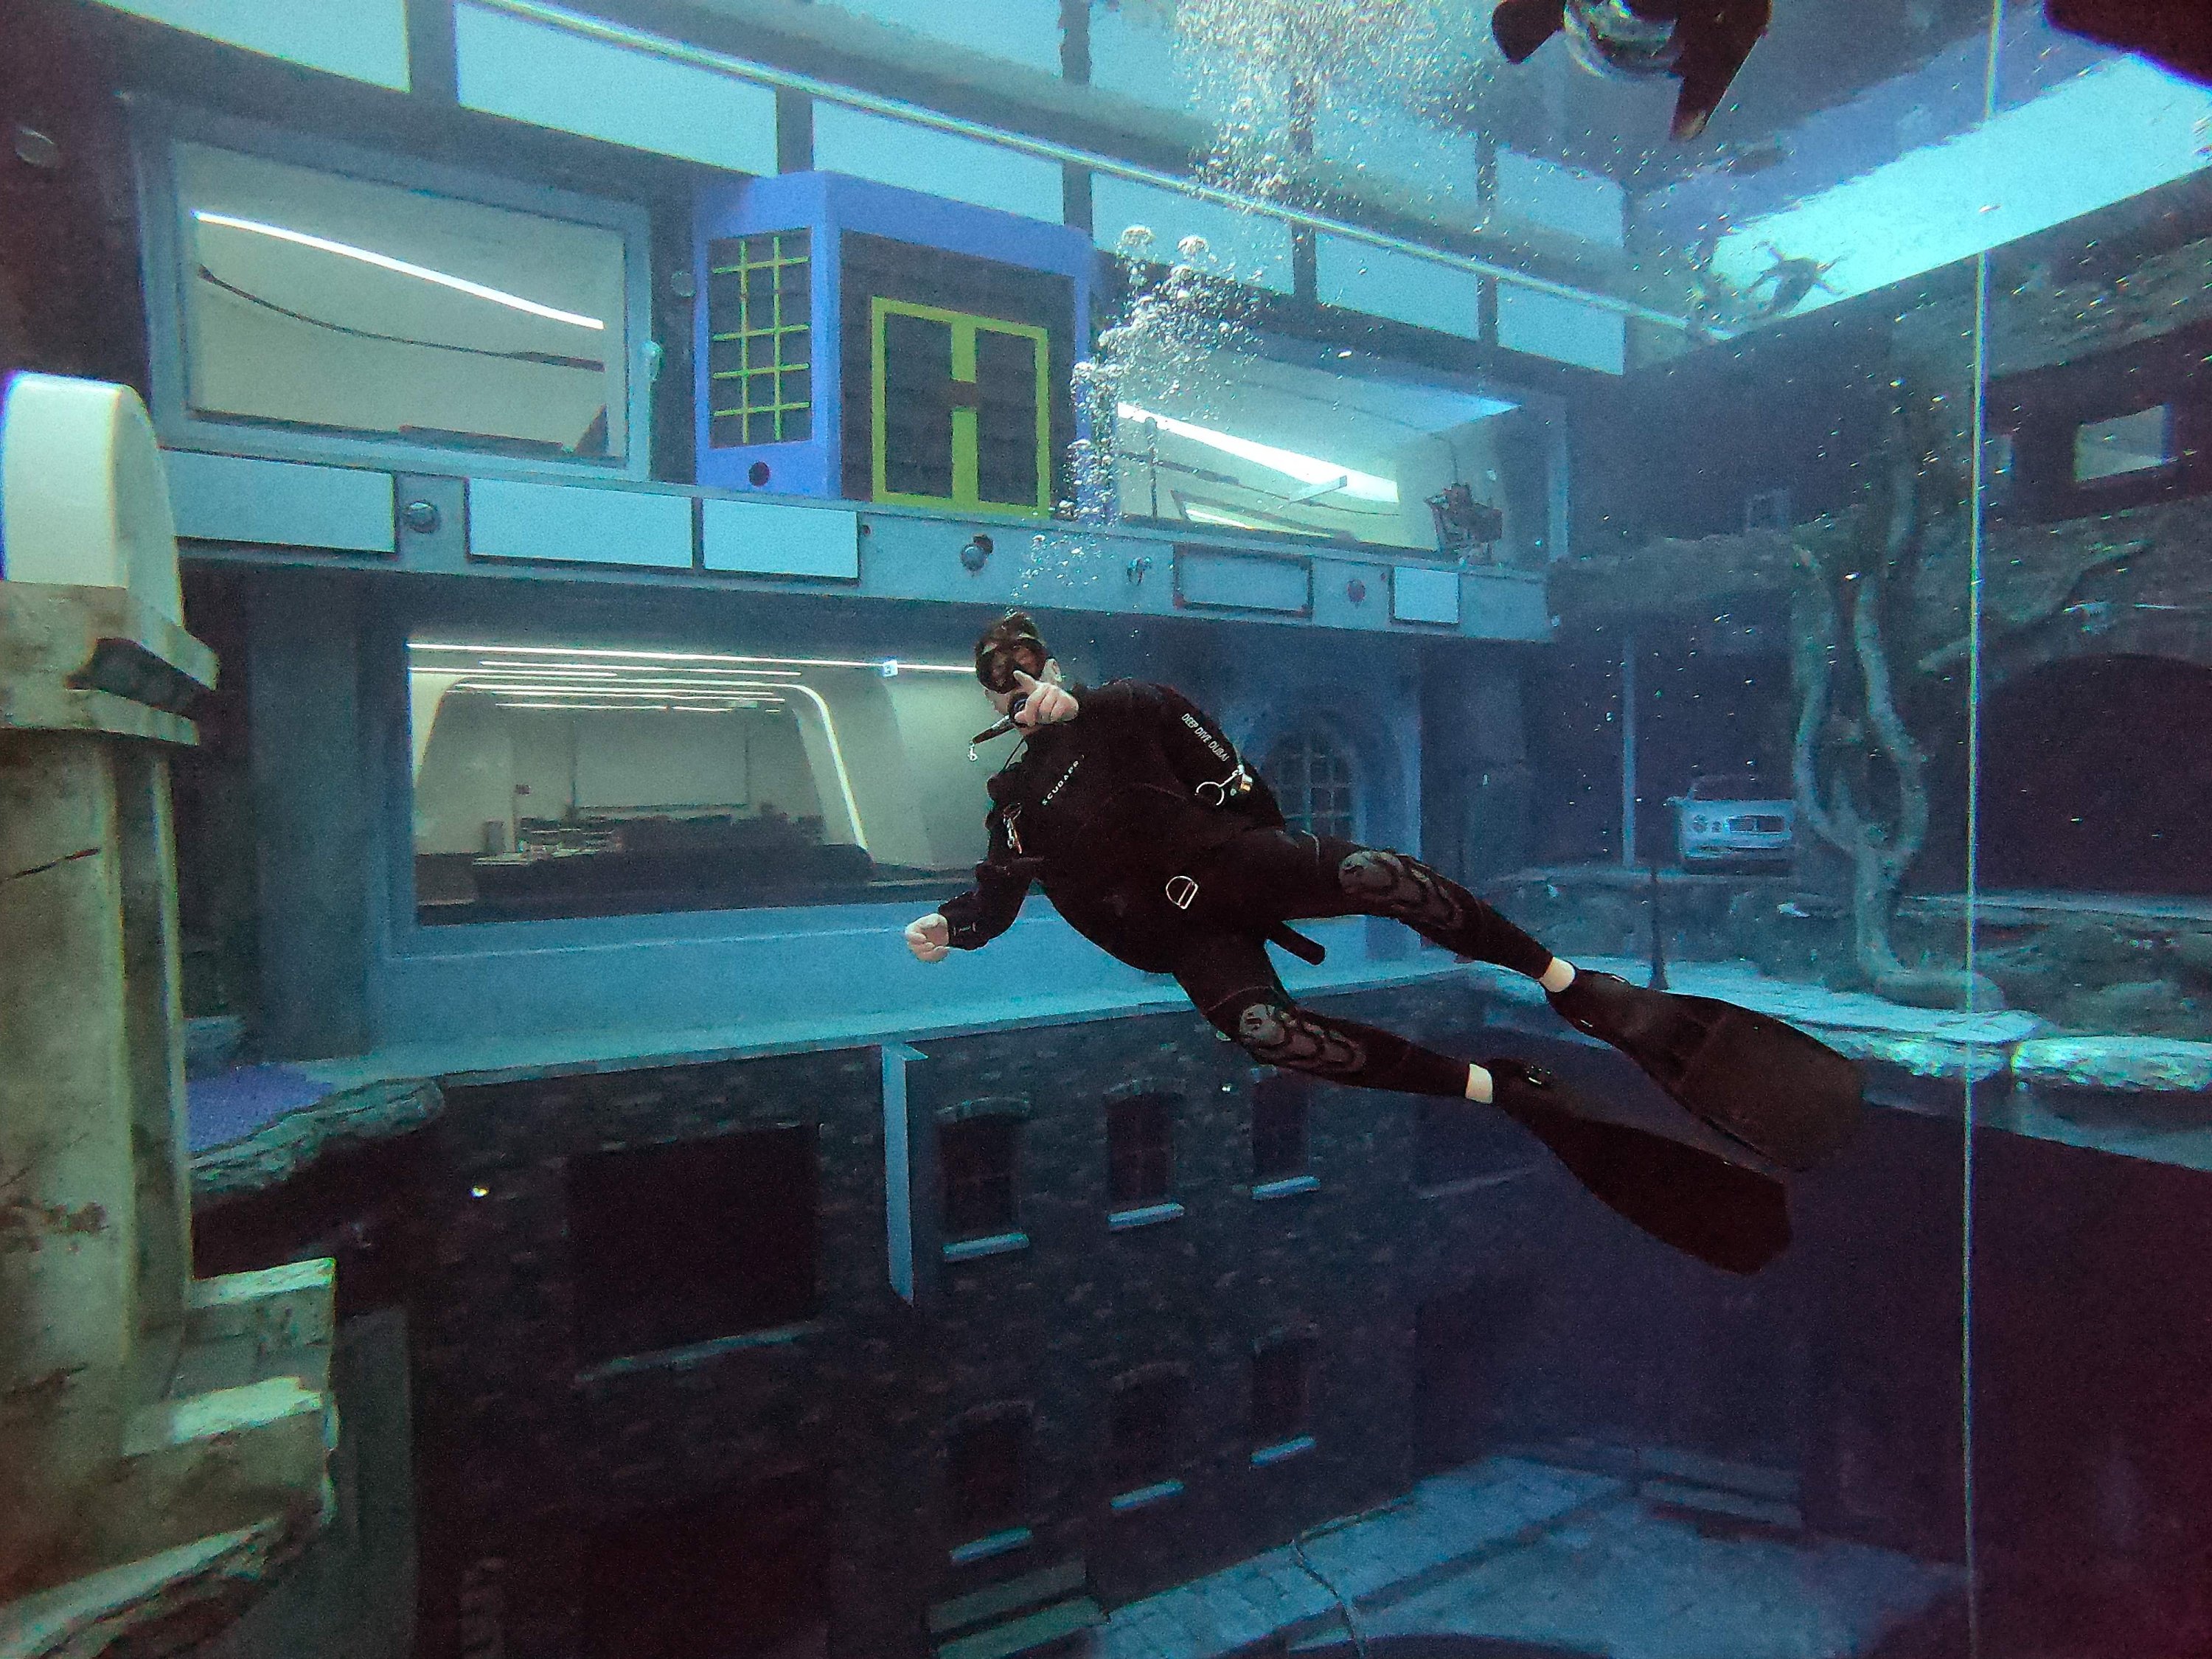 A diver explores a mock sunken city as he experiences Deep Dive Dubai, the deepest swimming pool in the world reaching 60 meters (nearly 200 feet), in the United Arab Emirates, July 10, 2021. (AFP Photo)